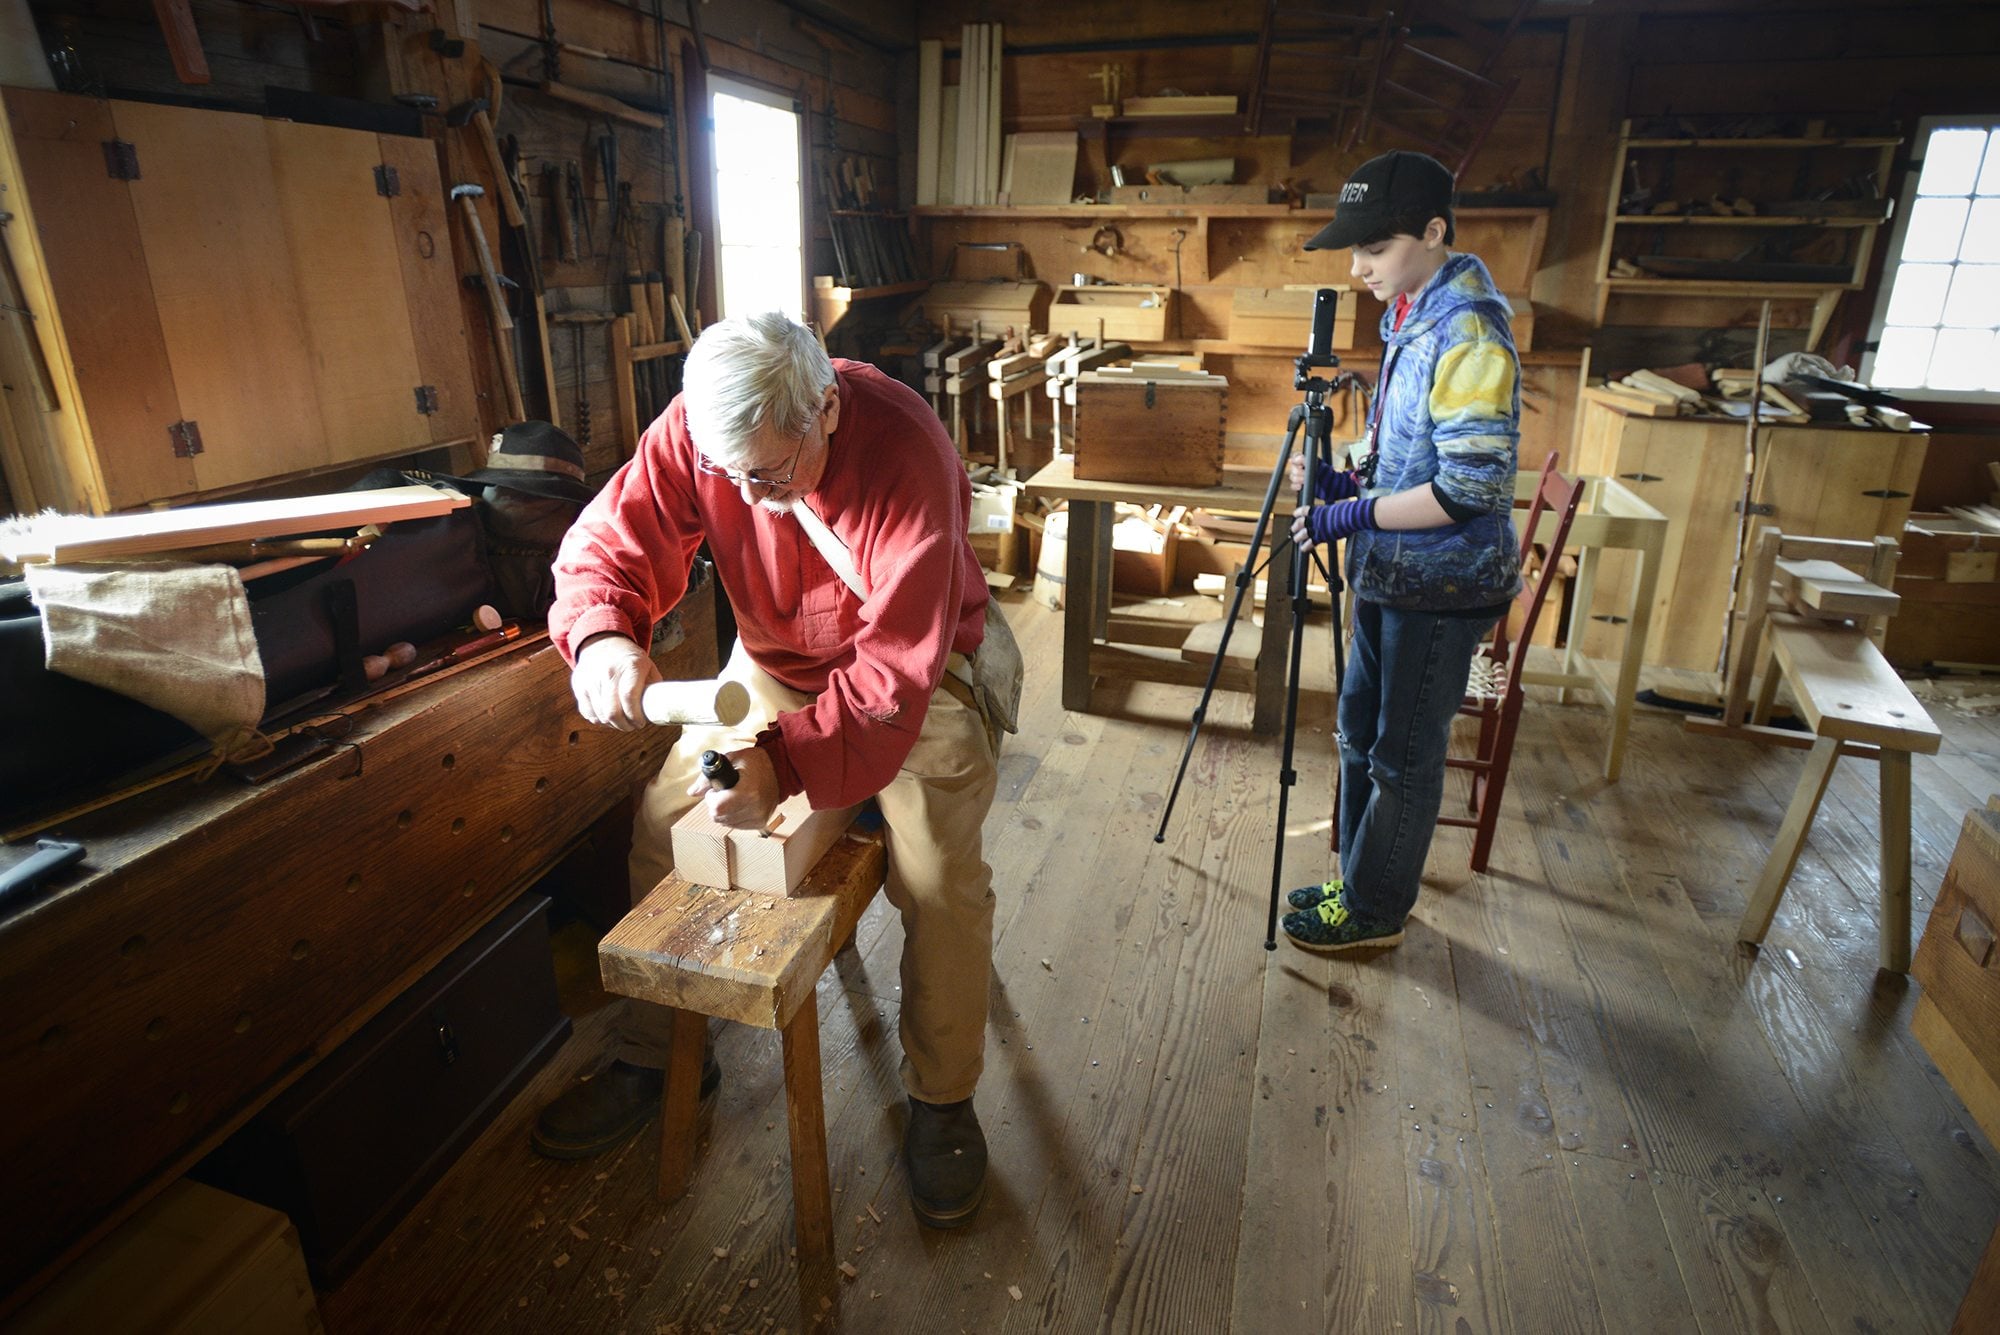 Eighth-grader Sophia Pettis, right, on Friday sets up a 360-degree camera next to carpenter volunteer Mick Robins at Fort Vancouver National Historic Site. Students from iTech Preparatory Middle School are creating a virtual reality tour of Fort Vancouver.